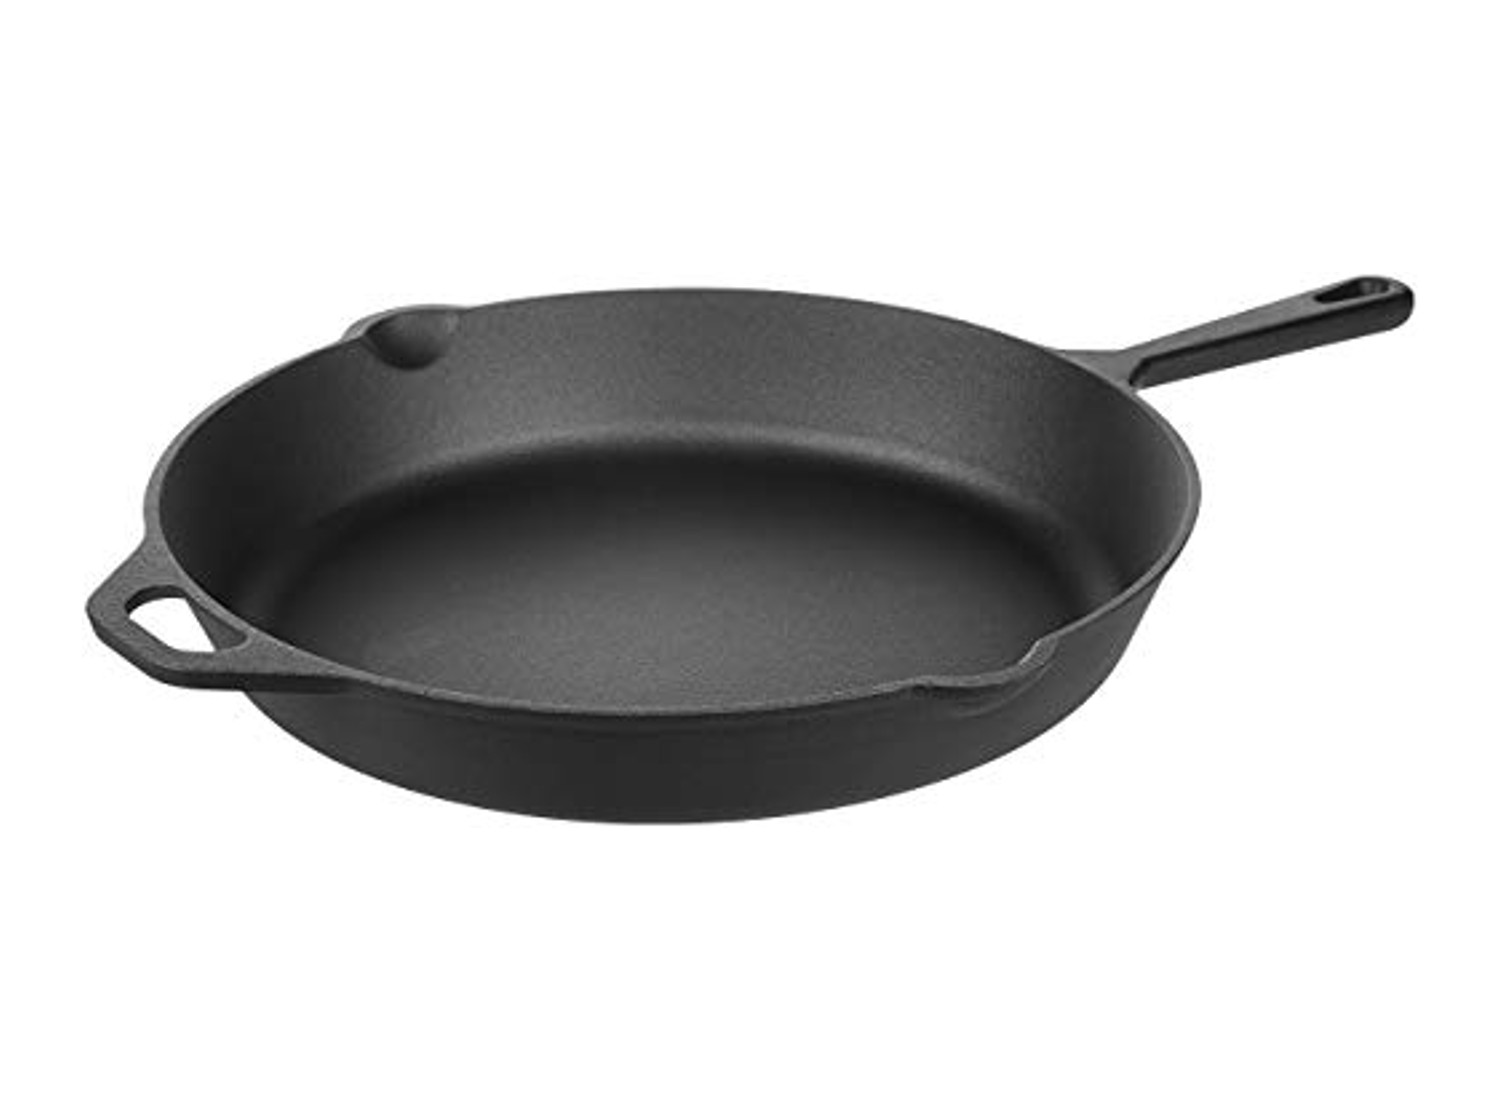  Utopia Kitchen Saute Fry Pan - Chefs Pan, Pre-Seasoned Cast  Iron Skillet - Frying Pan 12 Inch - Safe Grill Cookware for indoor &  Outdoor Use - Cast Iron Pan (Black)